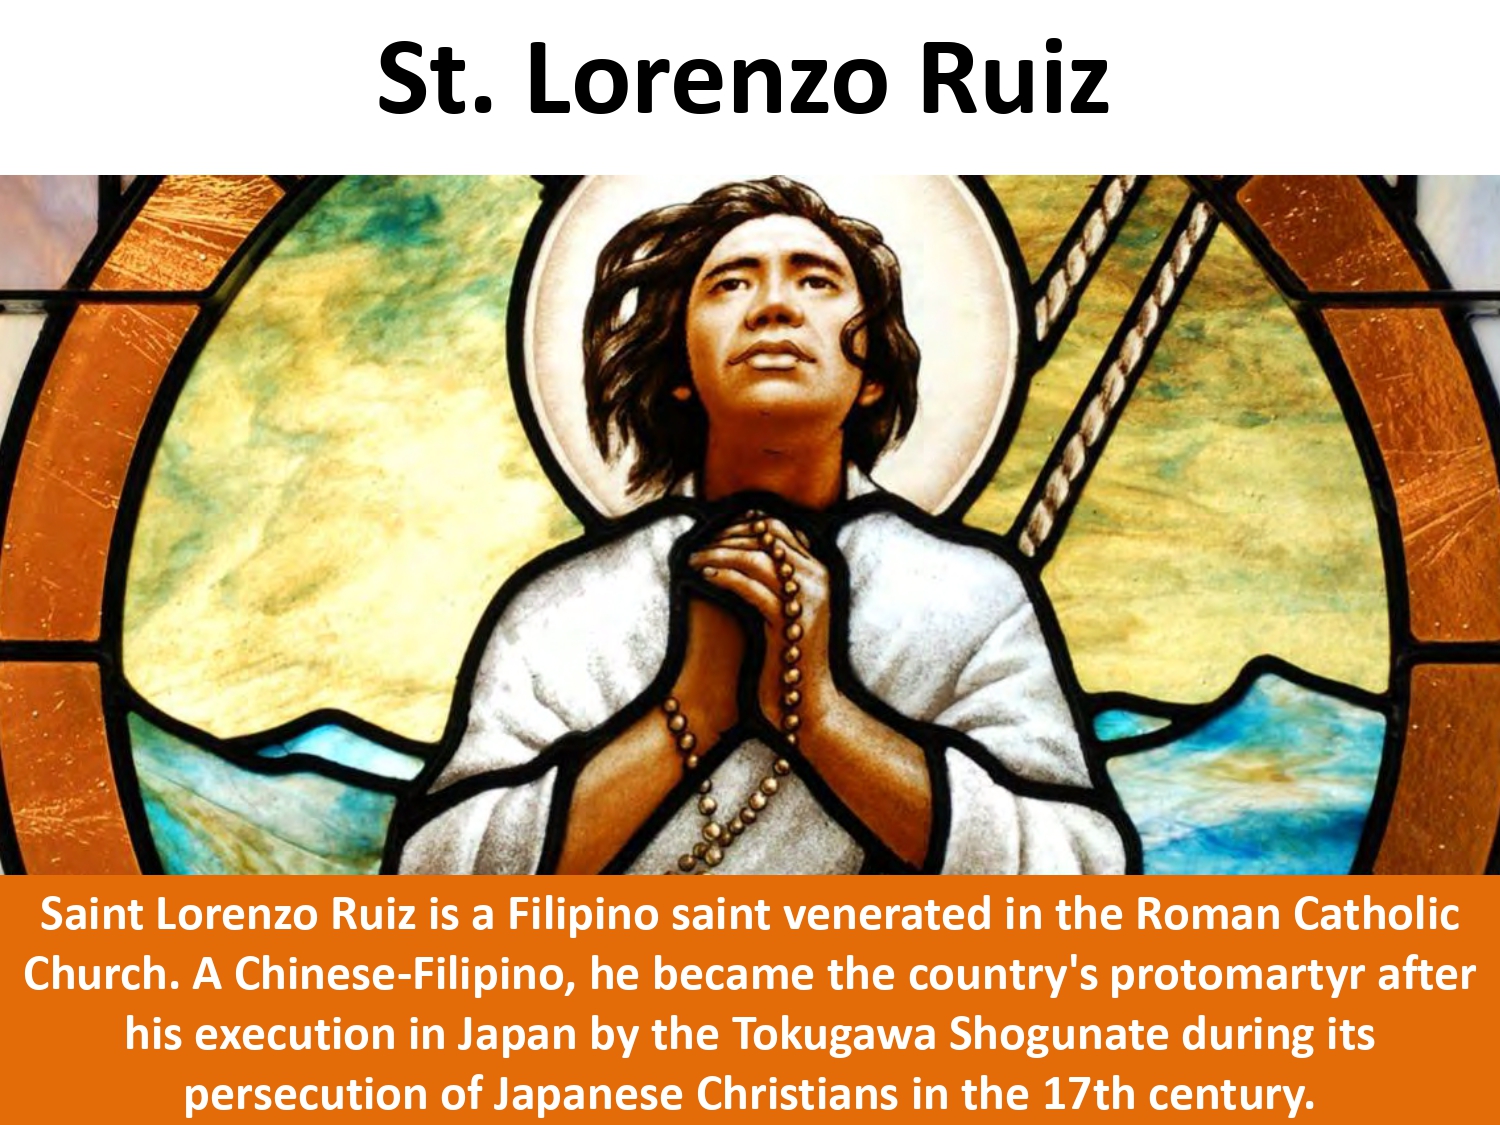 Saint Lorenzo Ruiz is a Filipino saint venerated in the Roman Catholic Church. A Chinese-Filipino, he became the country's protomartyr after his execution in Japan by the Tokugawa Shogunate during its persecution of Japanese Christians in the 17th century.